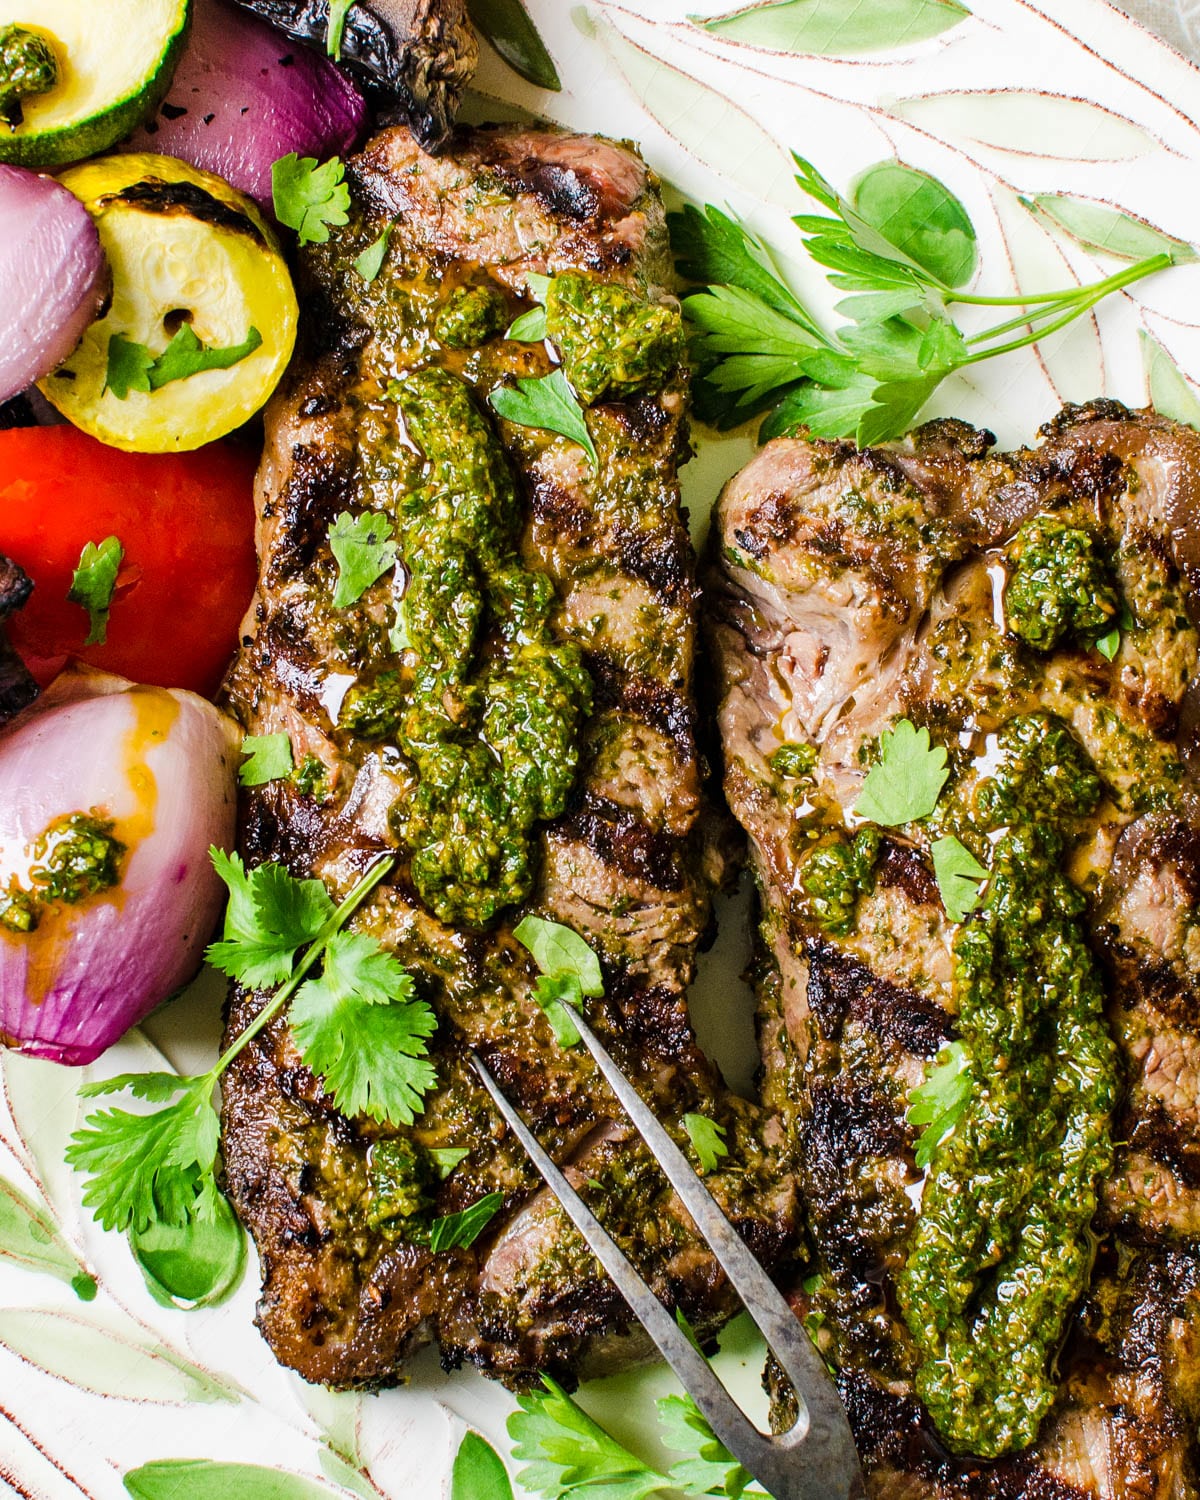 Grilled strip steaks with chermoula sauce and vegetables.